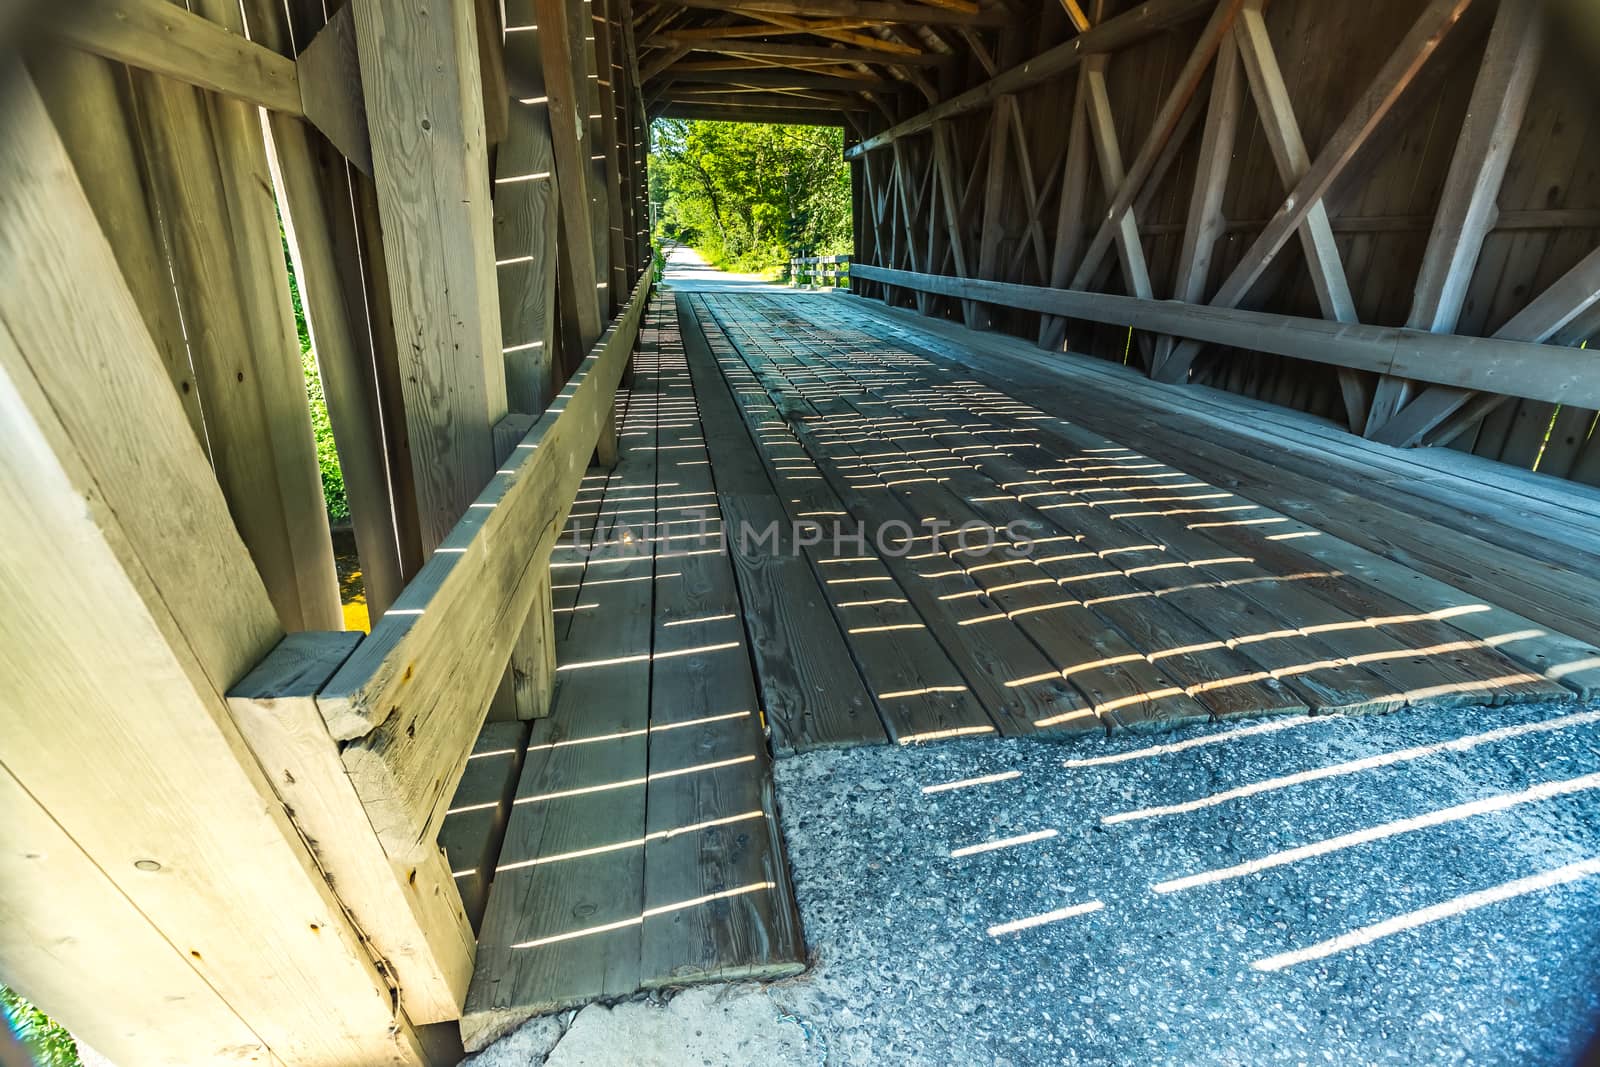 Bement Covered Bridge by adifferentbrian